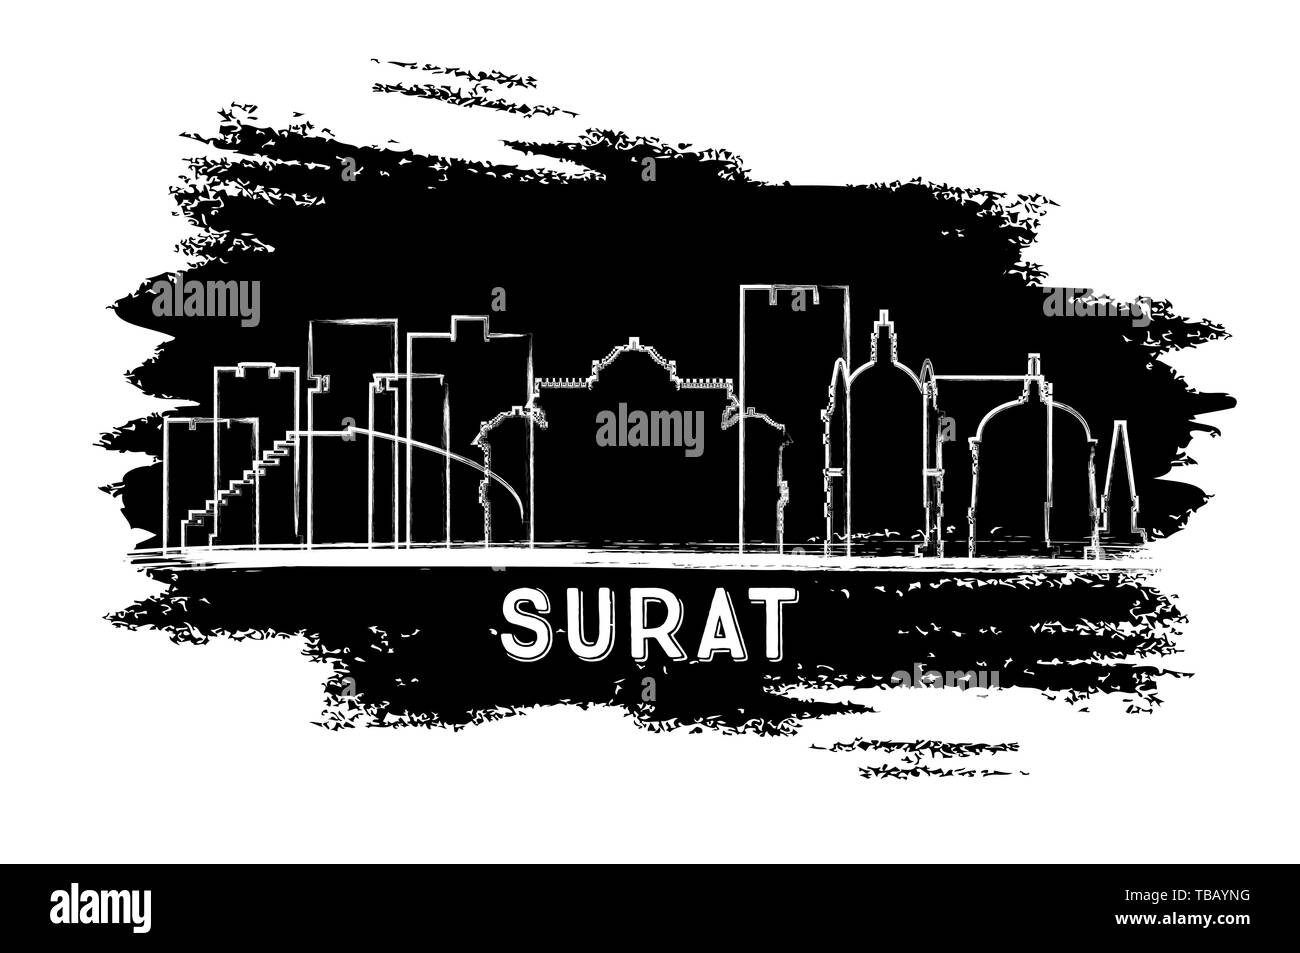 Surat India City Skyline Silhouette. Hand Drawn Sketch. Vector Illustration. Business Travel and Tourism Concept with Historic Architecture. Stock Vector